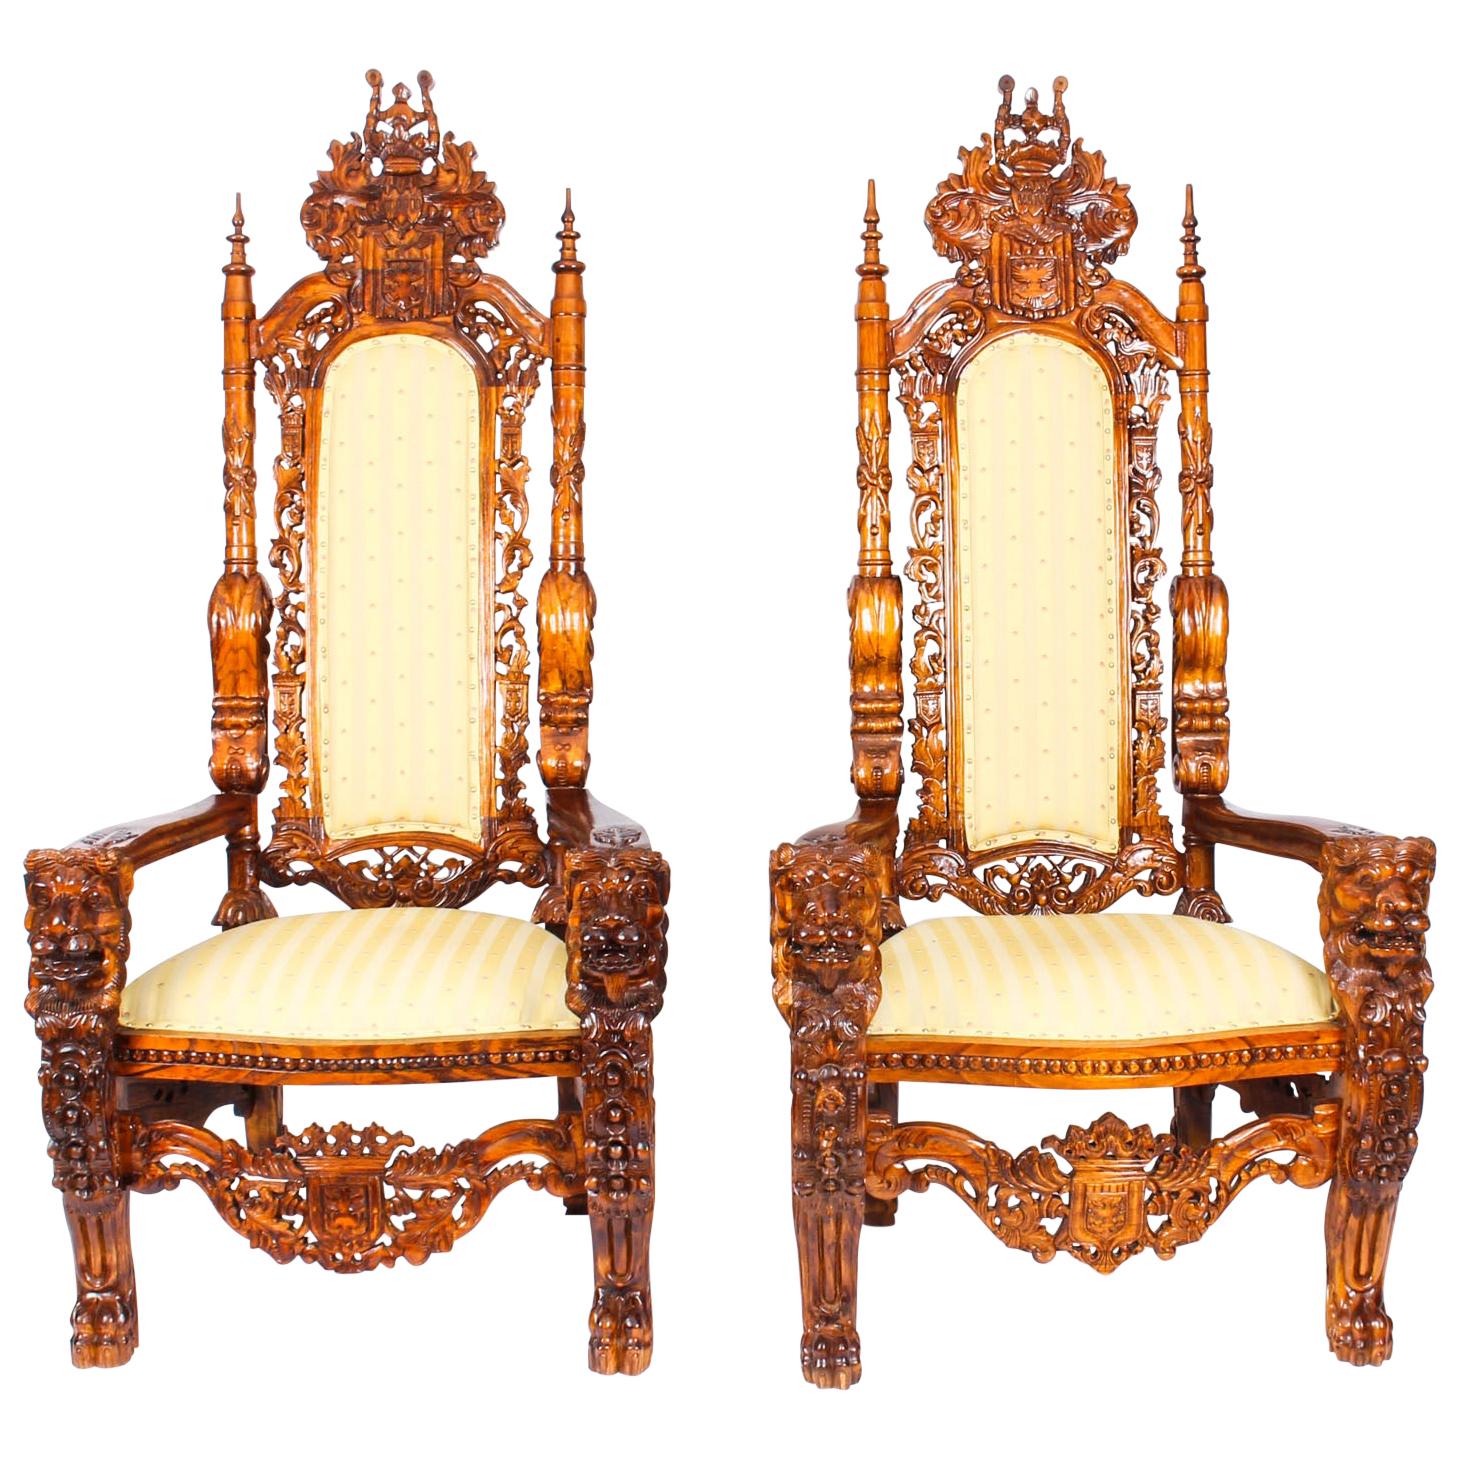 Vintage European Throne King and Queen Set Chairs 1800’s